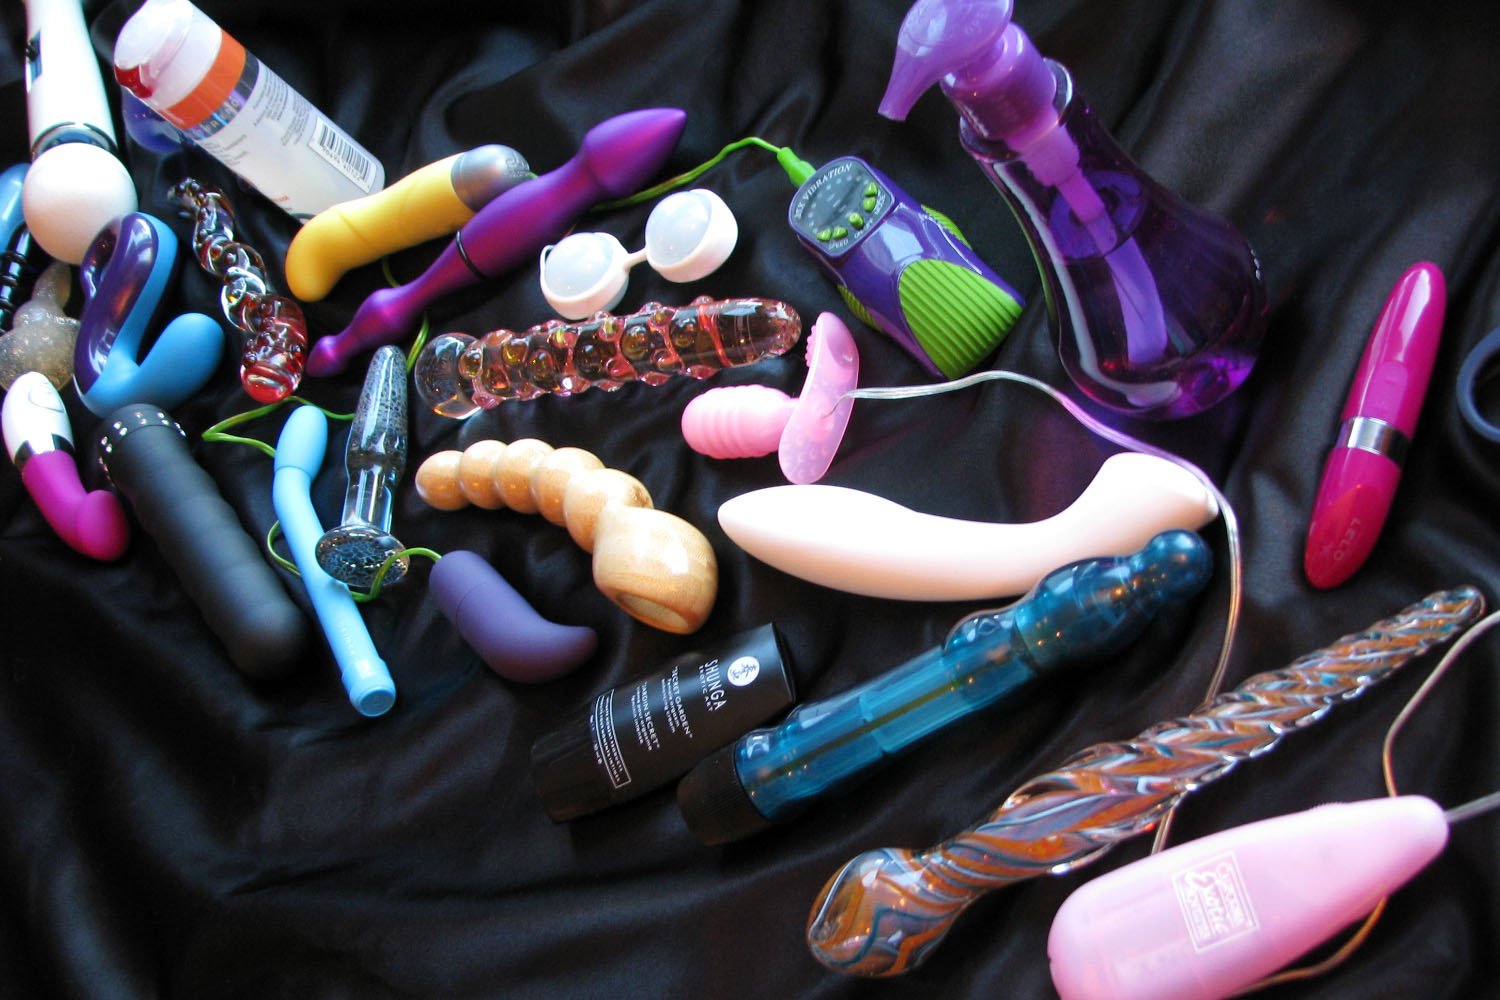 Outtake from my header image photoshoot. Sex toys all over my Throe.